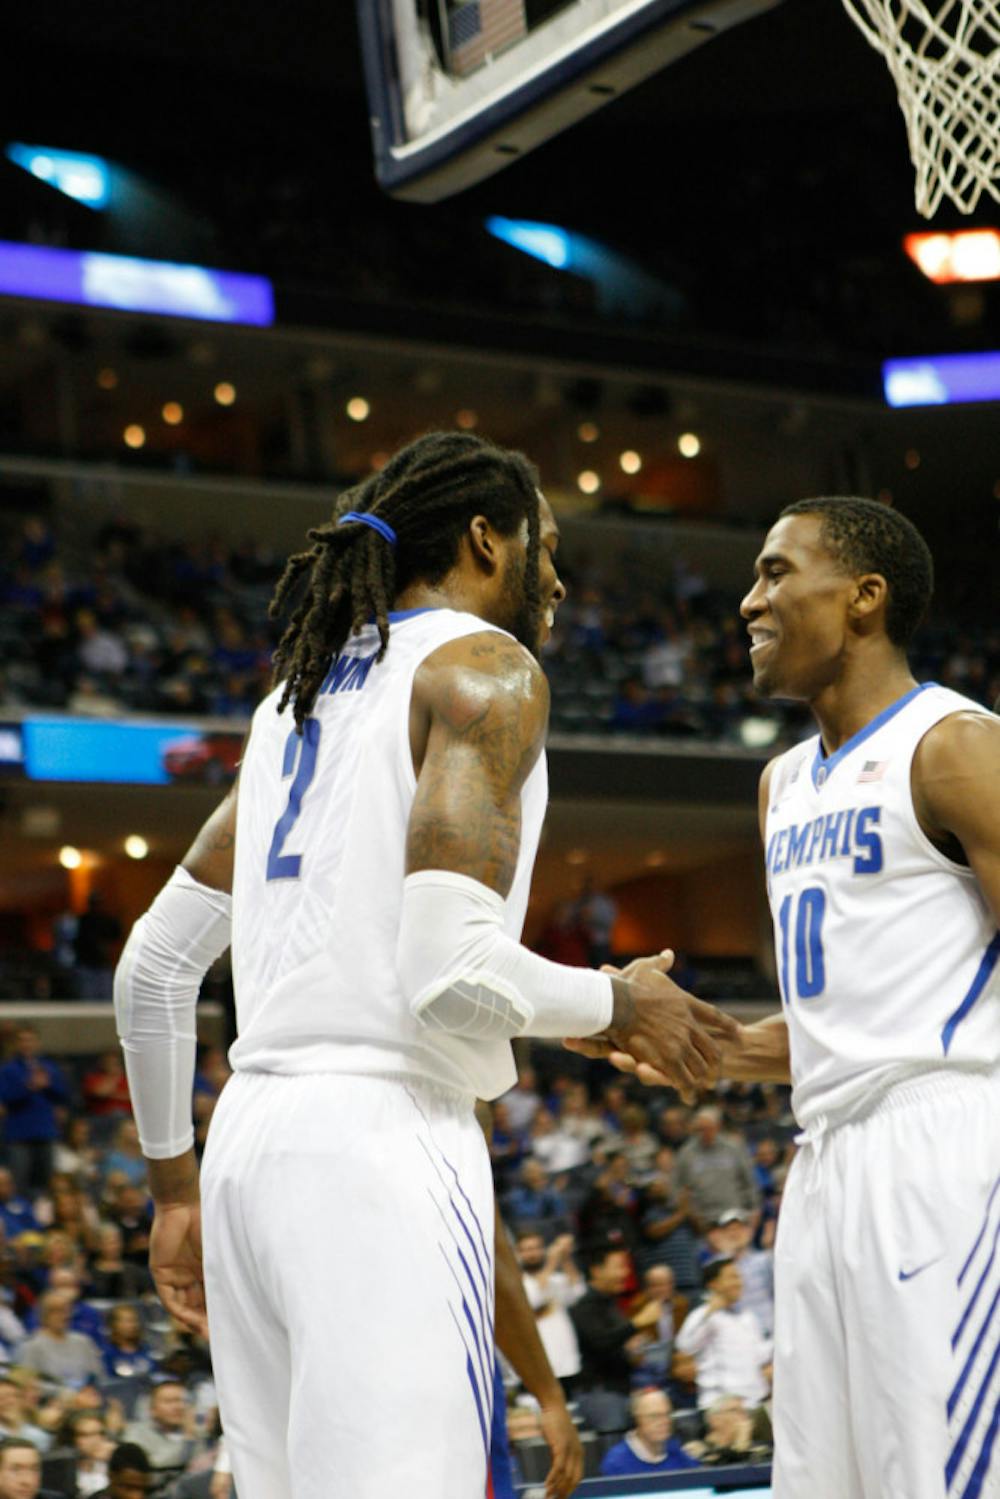 <p>Memphis senior forward Shaq Goodwin (left) led the way for the Tigers with 18 points and 12 rebounds in its 94-68 win over Louisiana Tech Tuesday night.&nbsp;</p>